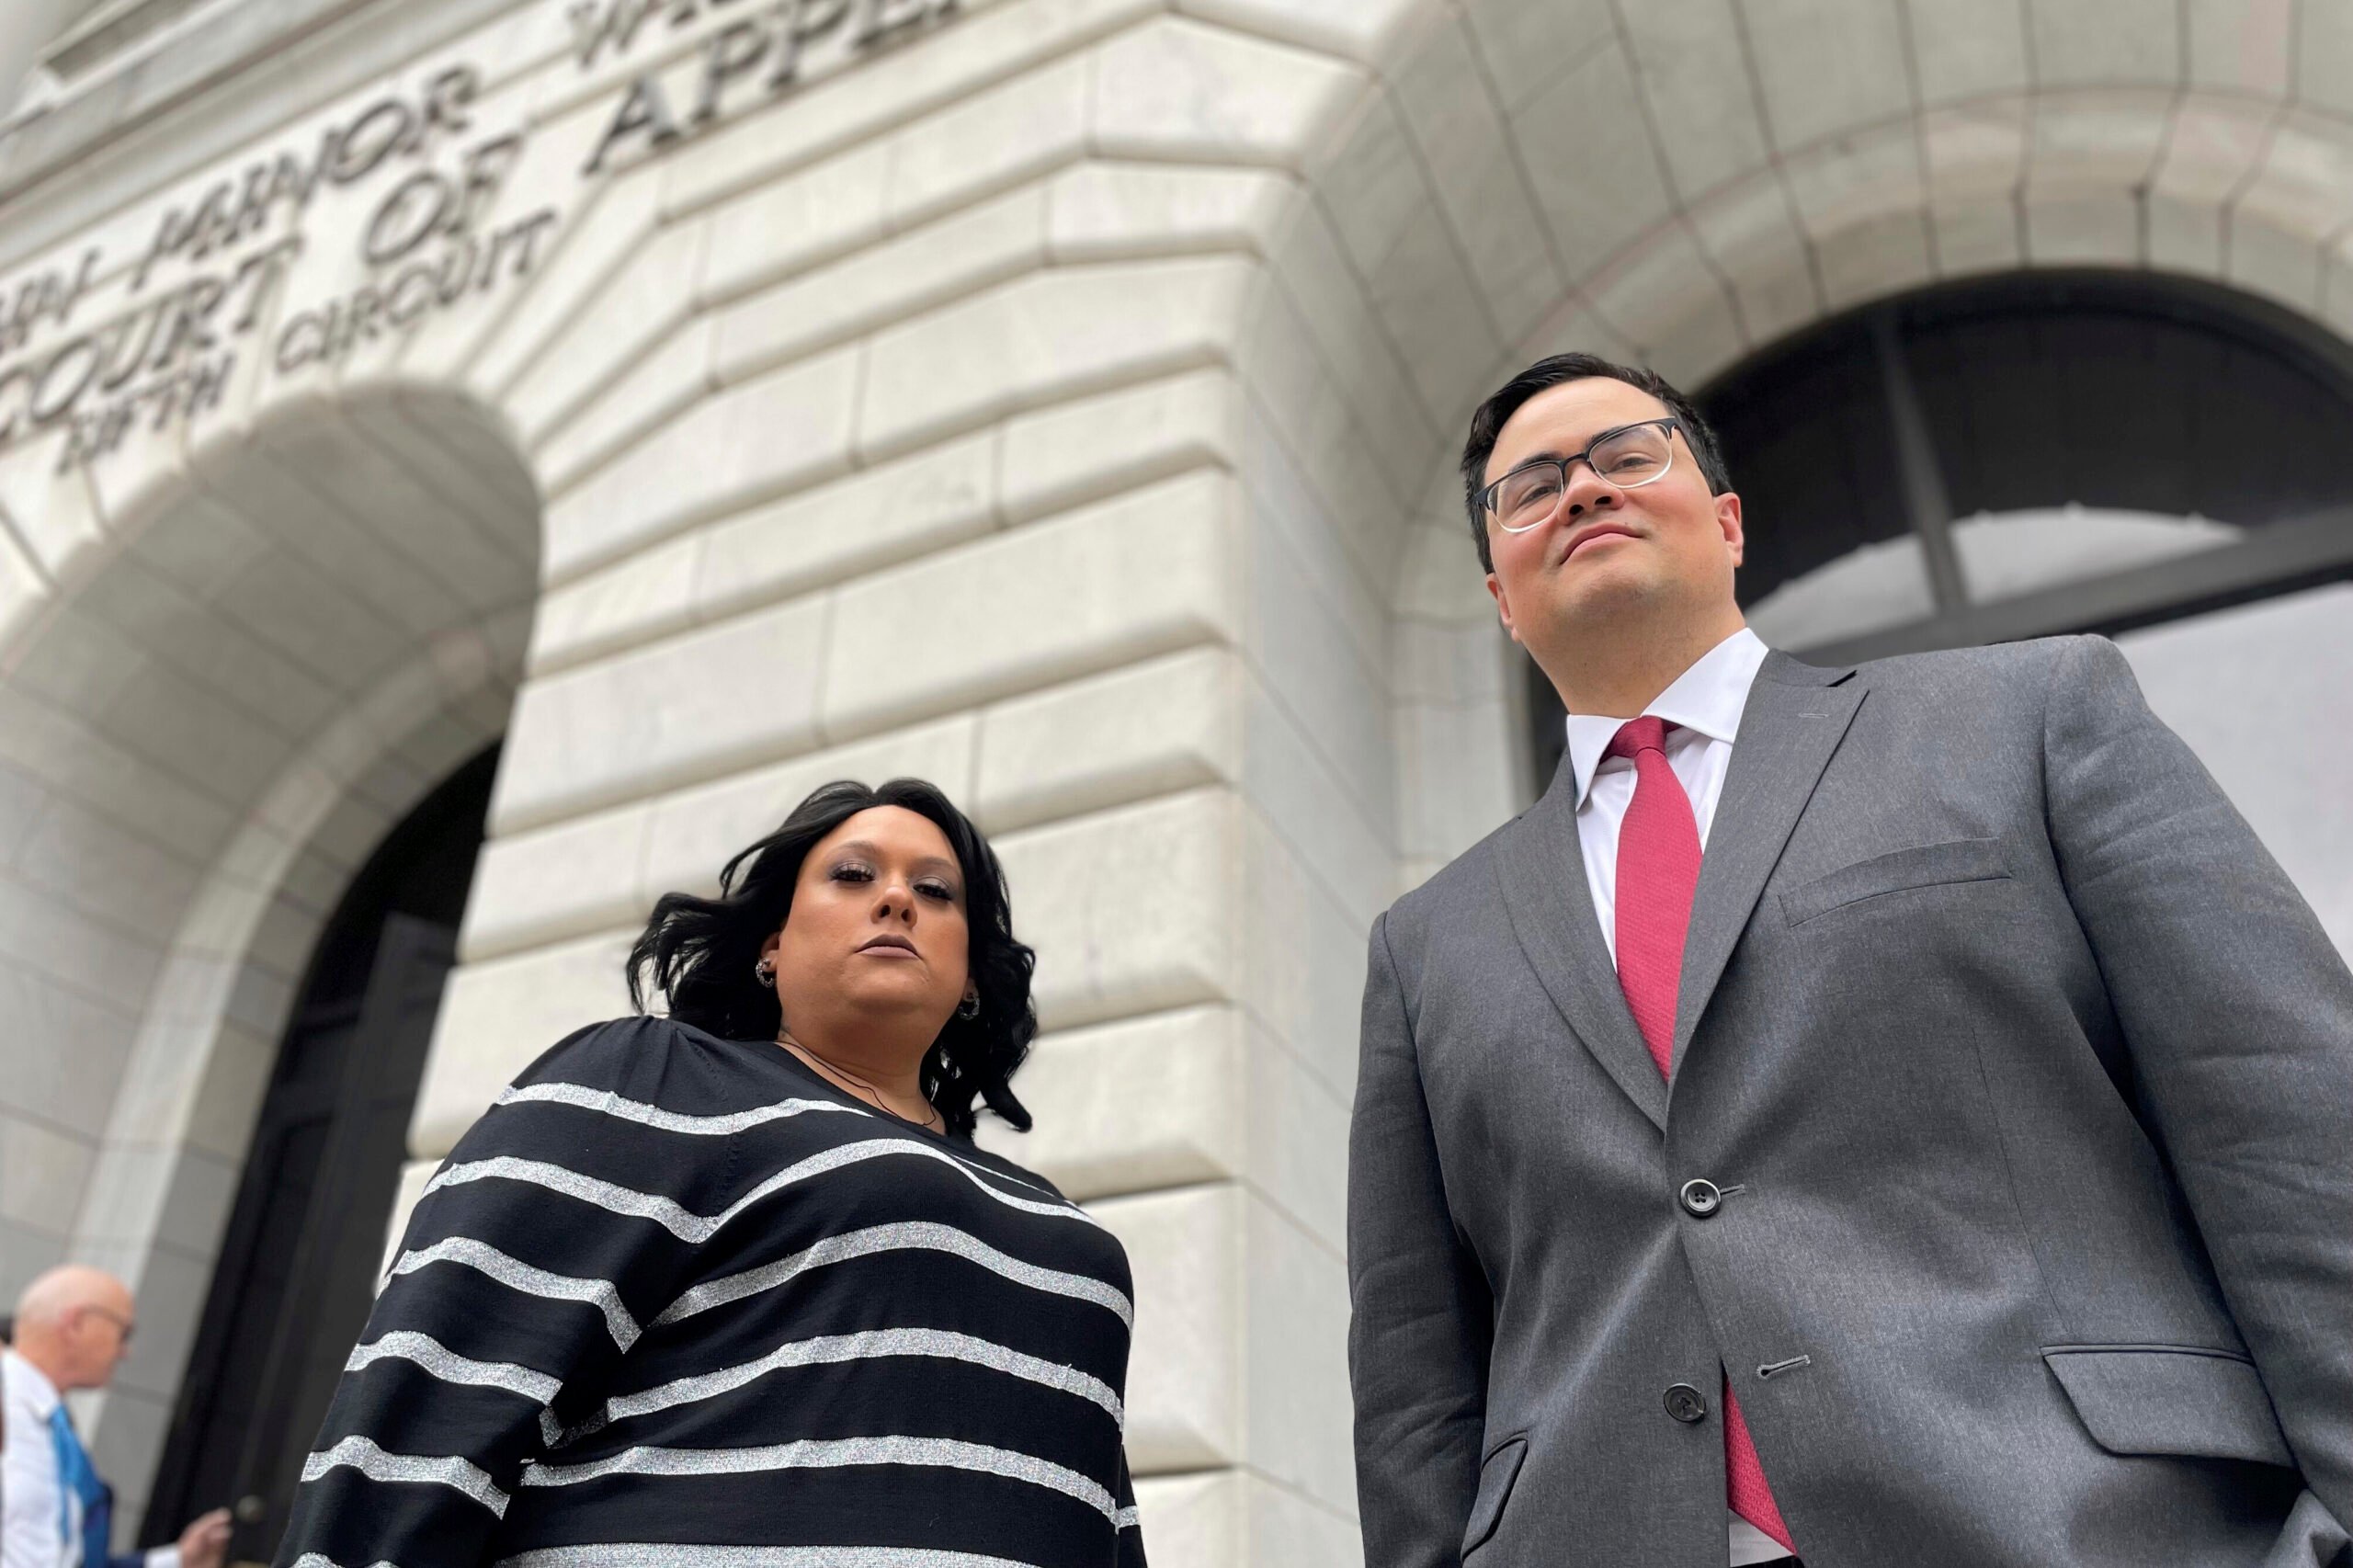 A Latino woman and man stand with serious, proud expressions outside of a courthouse. Priscilla Villarreal is in a black and white striped sweater while her lawyer, J.T. Morris, wears a suit and tie.